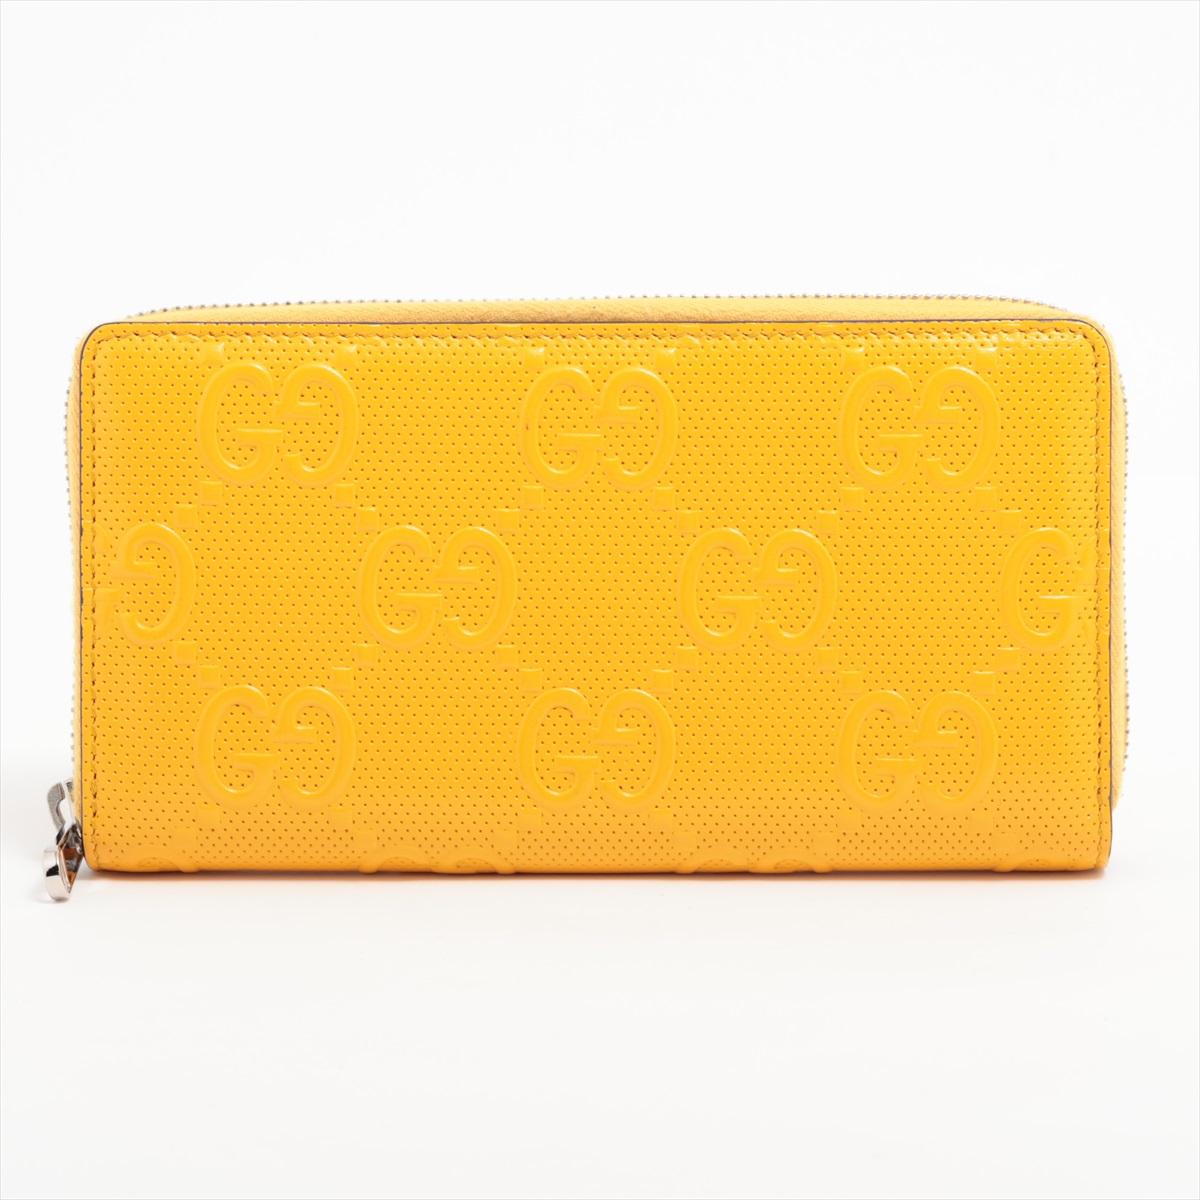 The Gucci GG Embossed Leather Zip Long Wallet in Yellow is a vibrant and stylish accessory that adds a pop of color to any ensemble. Crafted from high-quality leather, the wallet features Gucci's iconic GG embossed pattern, showcasing the brand's